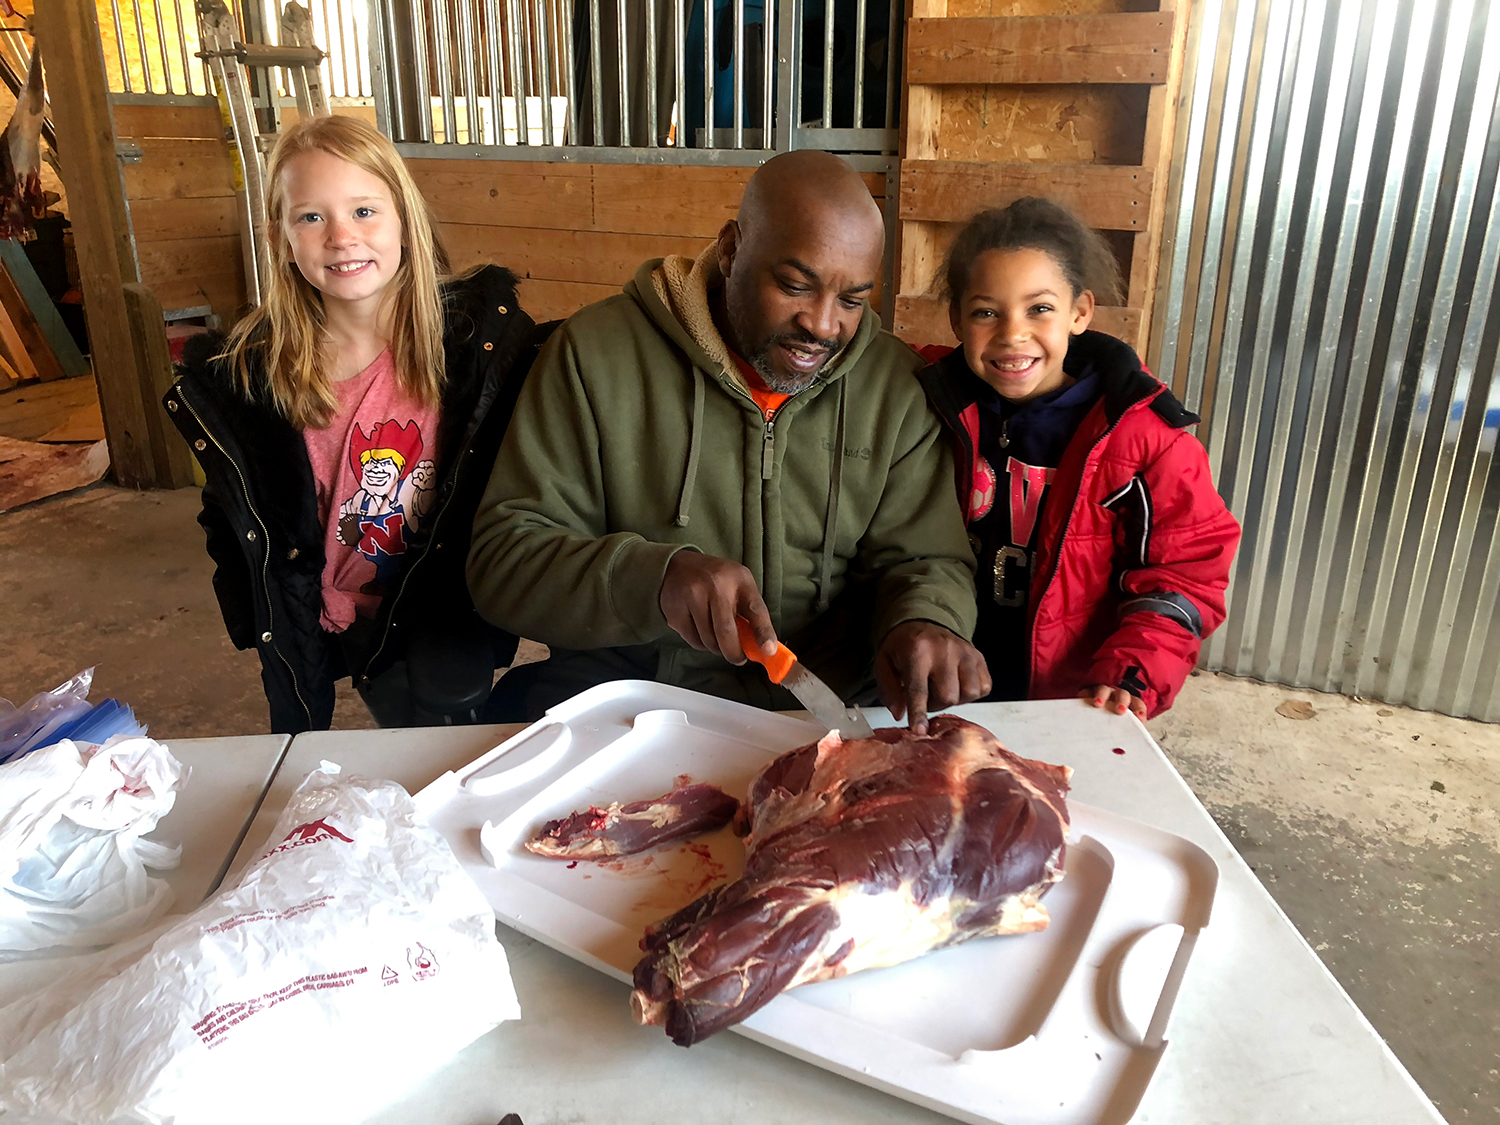 A black man carves and butchers deer meat while two kids stand beside him.